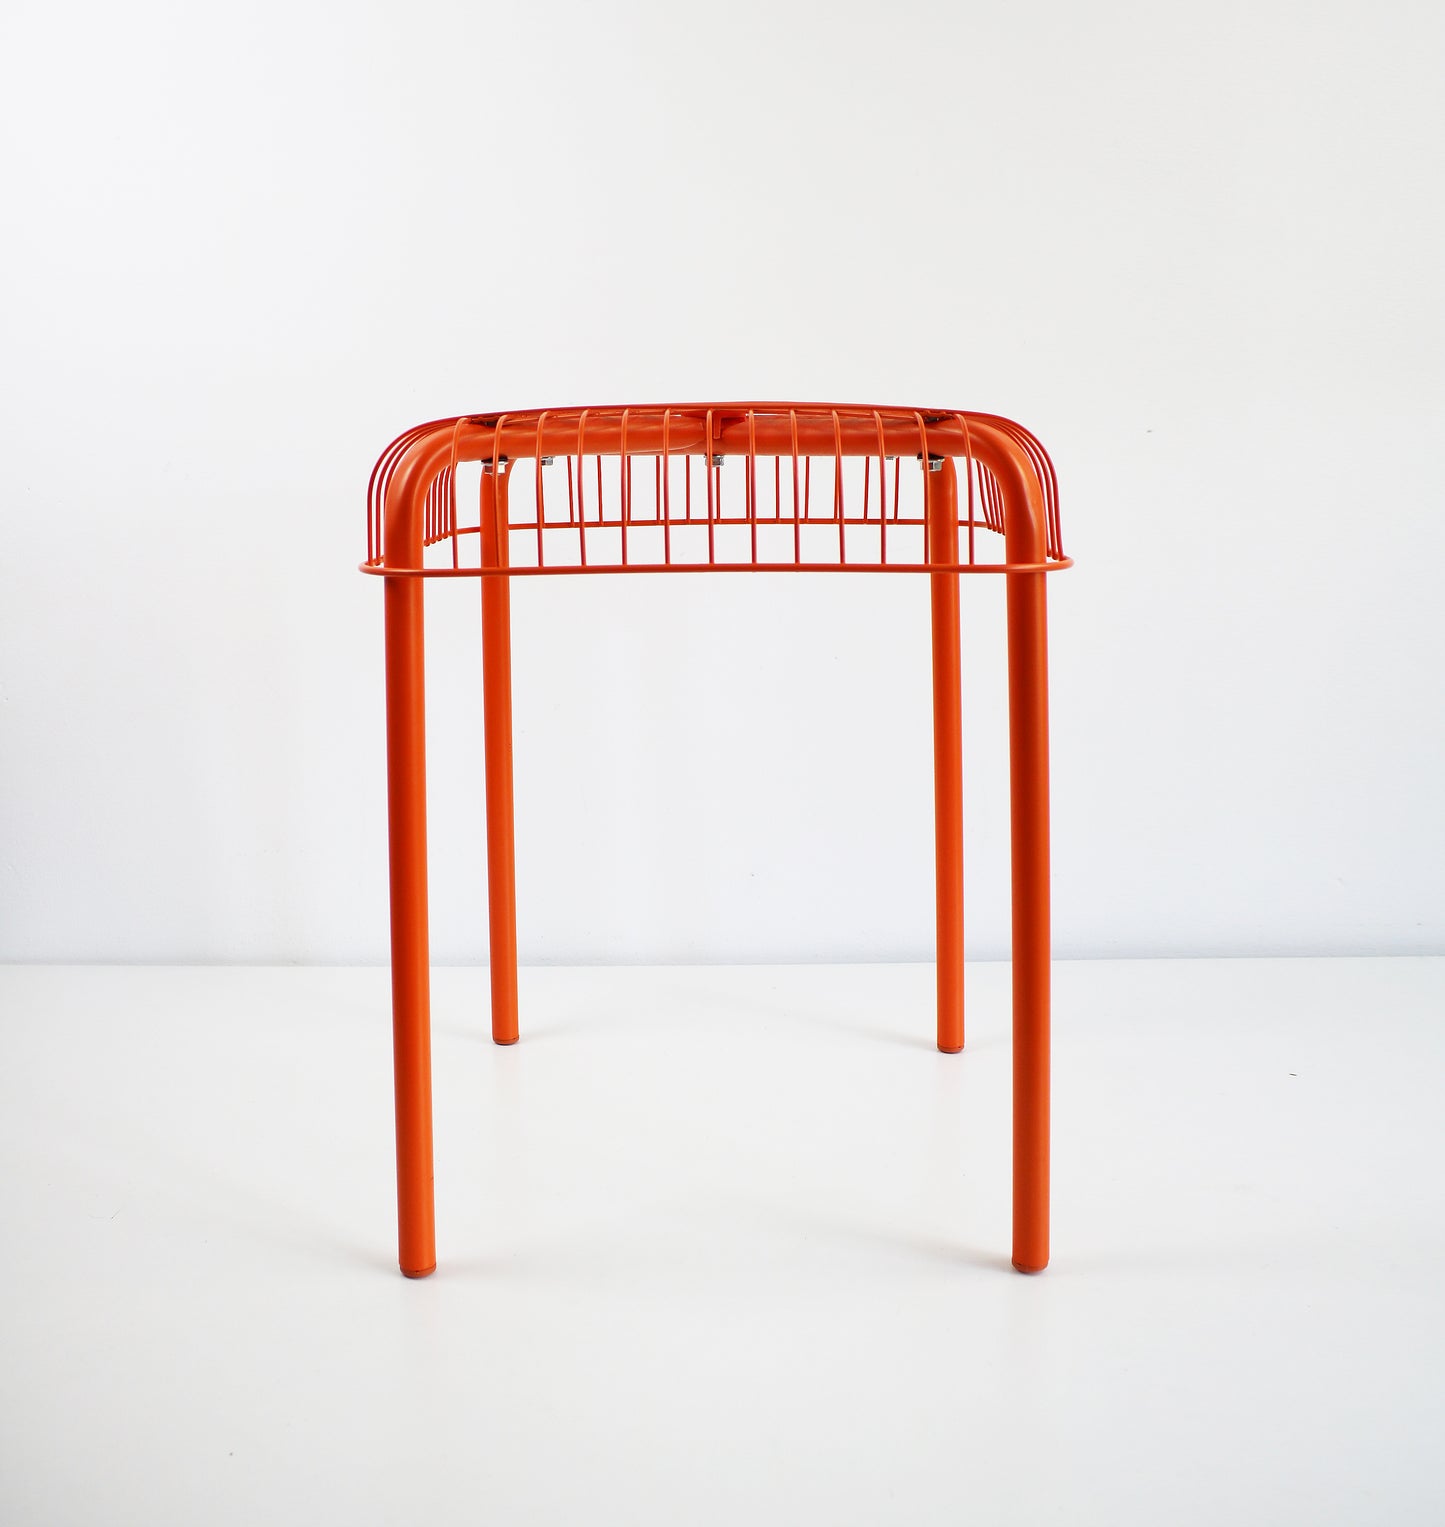 2015 Vasteron stool by Bermudez and Cayouette for Ikea